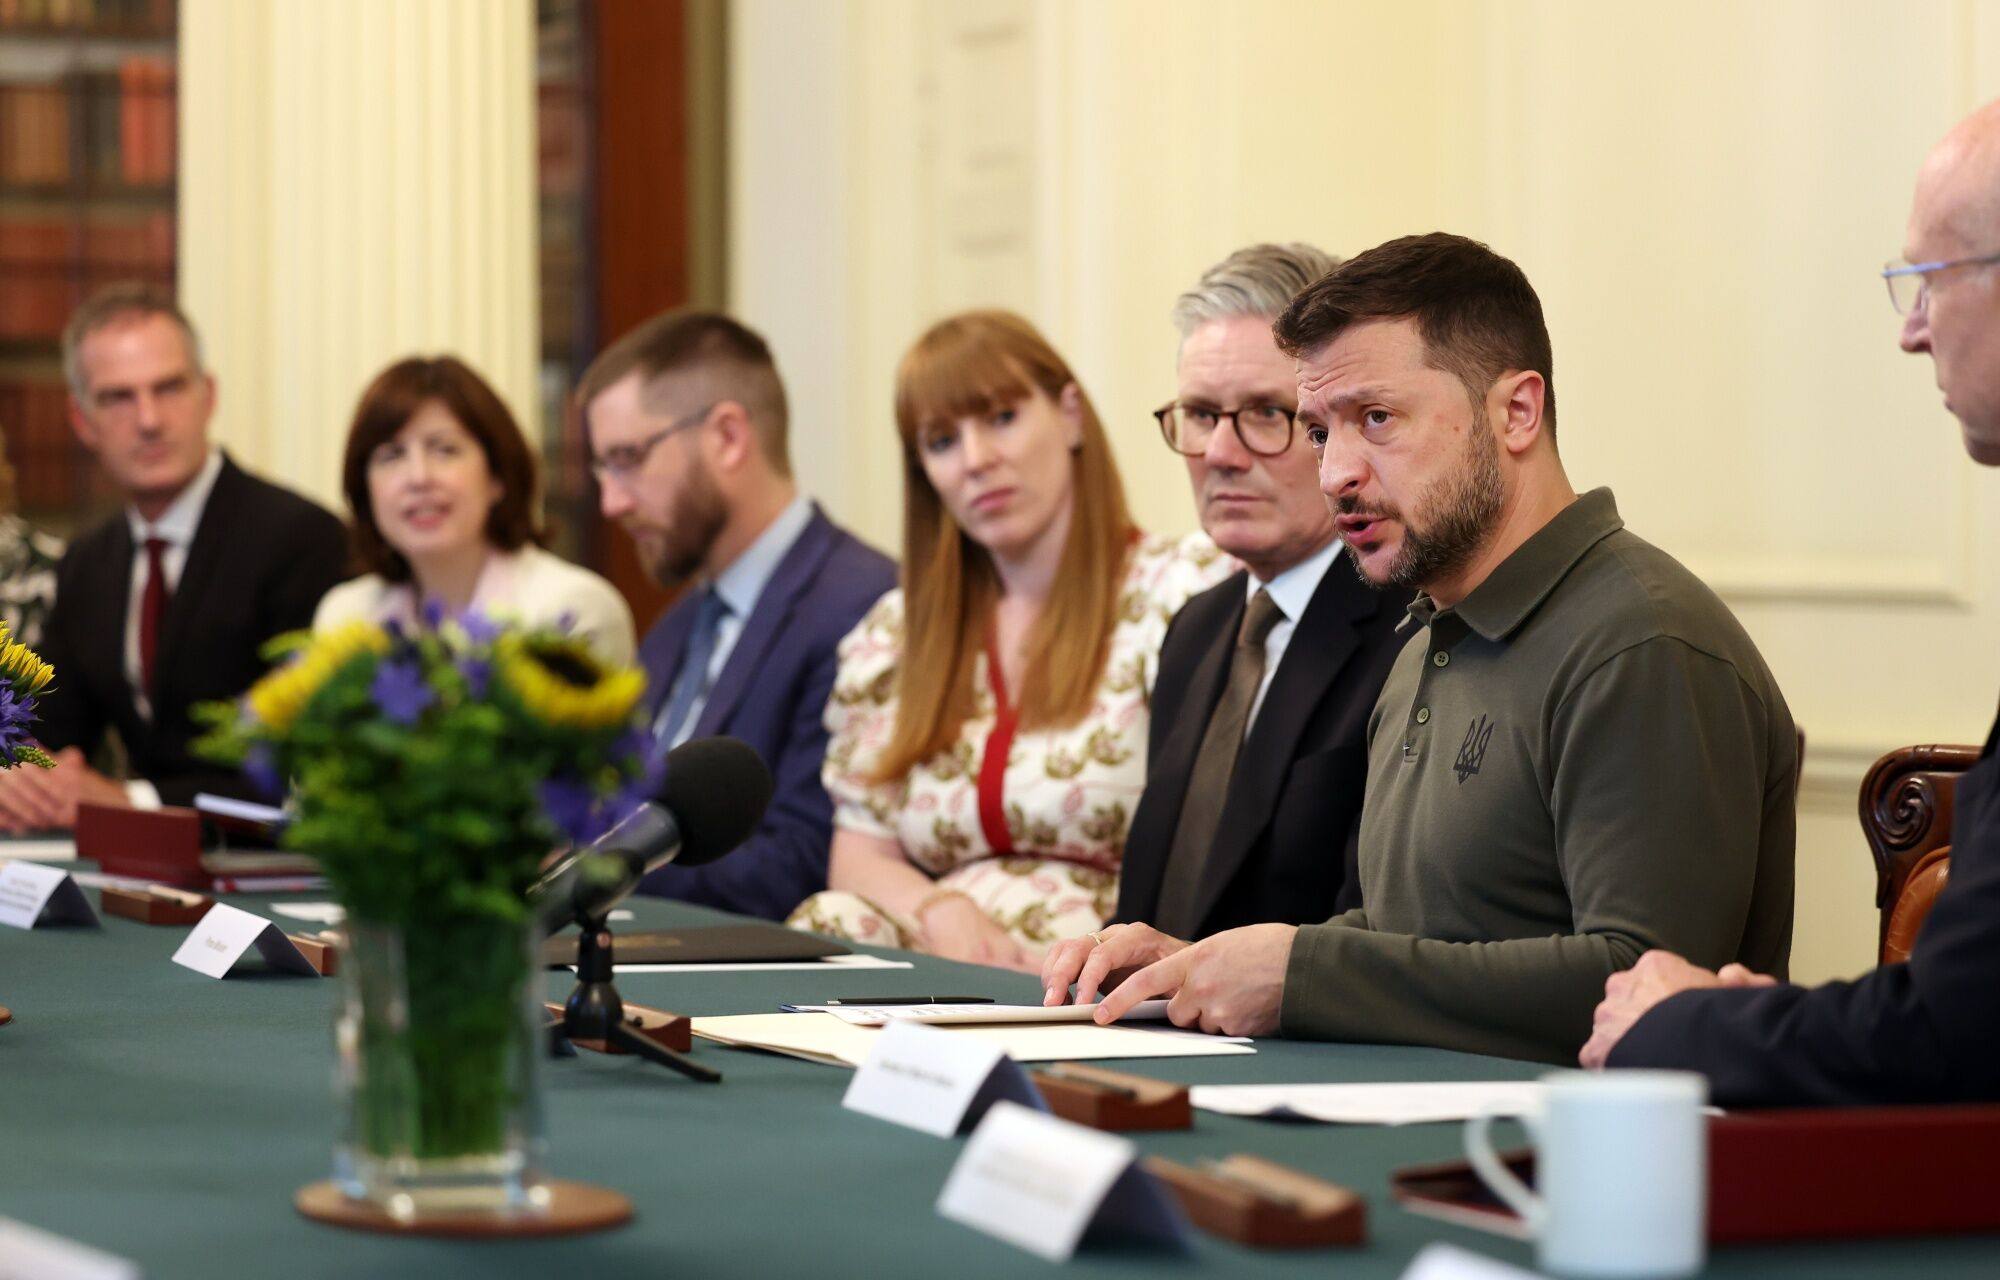 Ukrainian president Volodymyr Zelenskiy attends a cabinet meeting chaired by UK prime minister, Keir Starmer on July 19. Starmer announced a crackdown on Russia’s shadow fleet of oil tankers used to skirt sanctions. Photo: Bloomberg